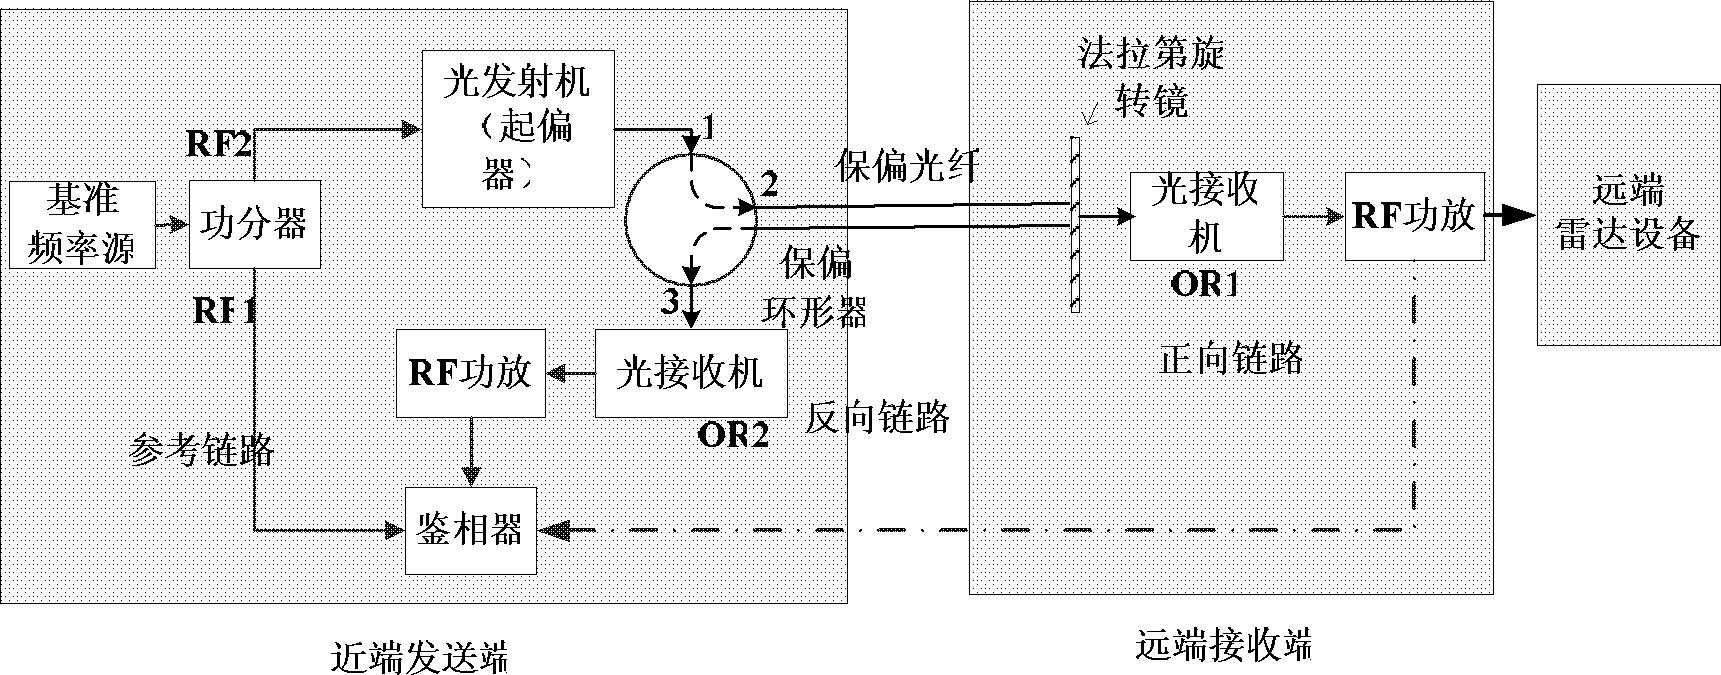 Microwave optical fiber link device for long-distance transmission of radar reference frequency signals